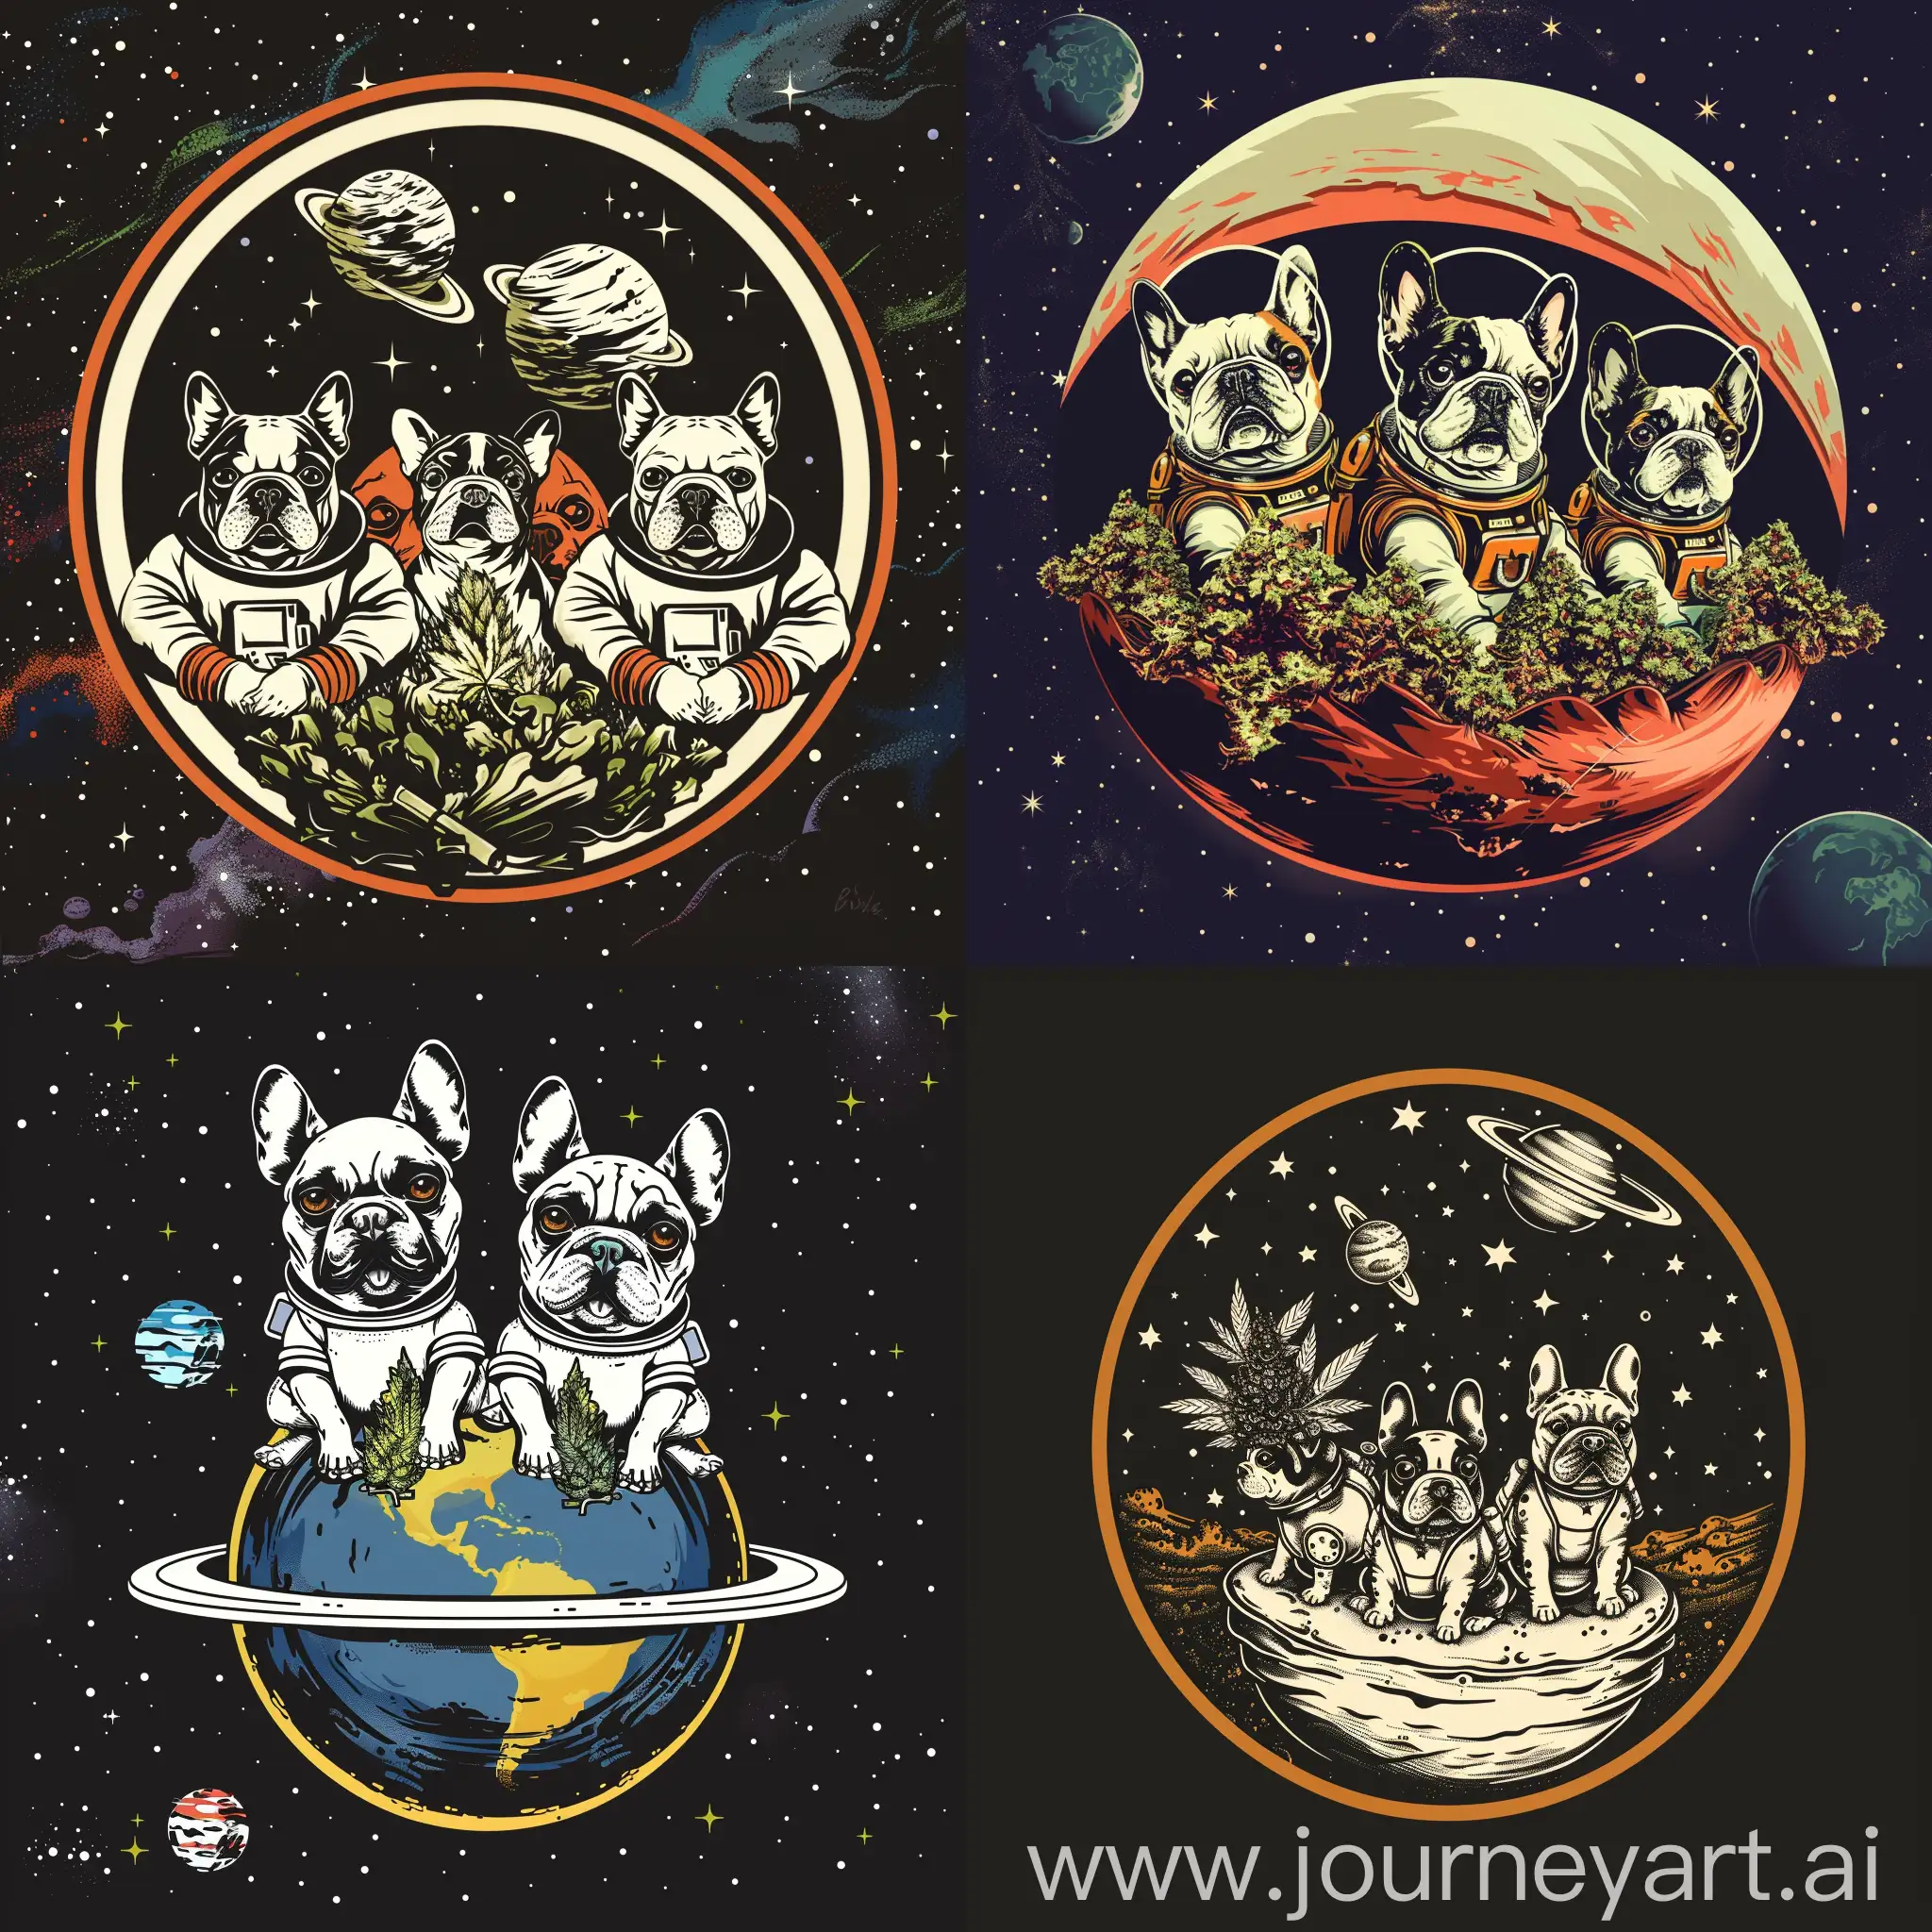 French-Bulldog-Astronauts-with-Marijuana-in-Space-on-a-Unique-Earthlike-Planet-American-Space-Force-Aesthetic-Logo